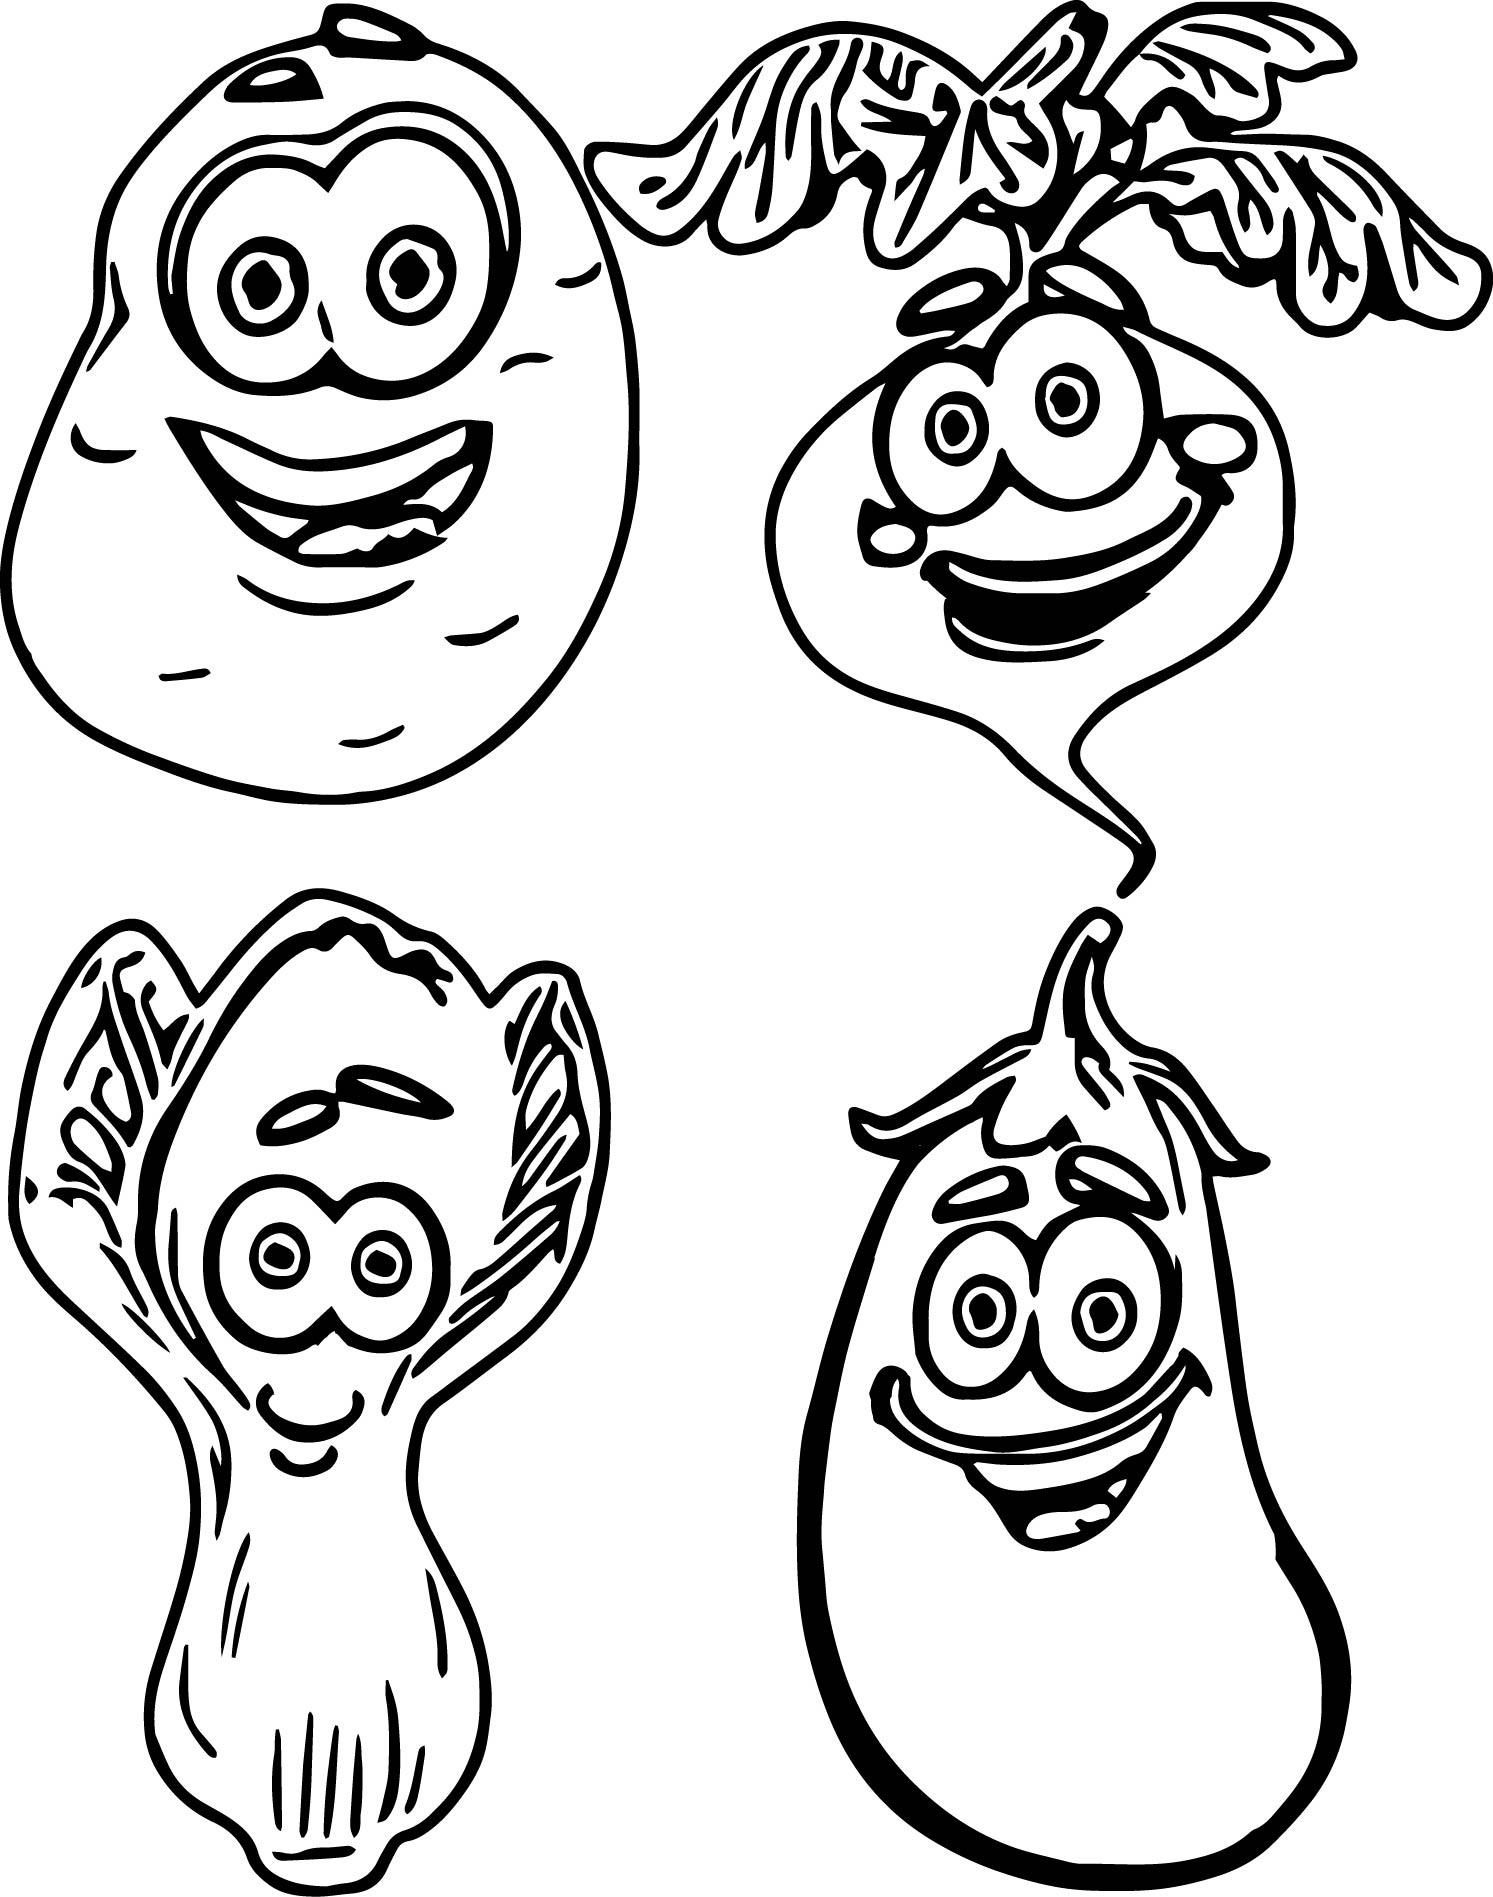 Vegetable Coloring Pages Best Coloring Pages For Kids